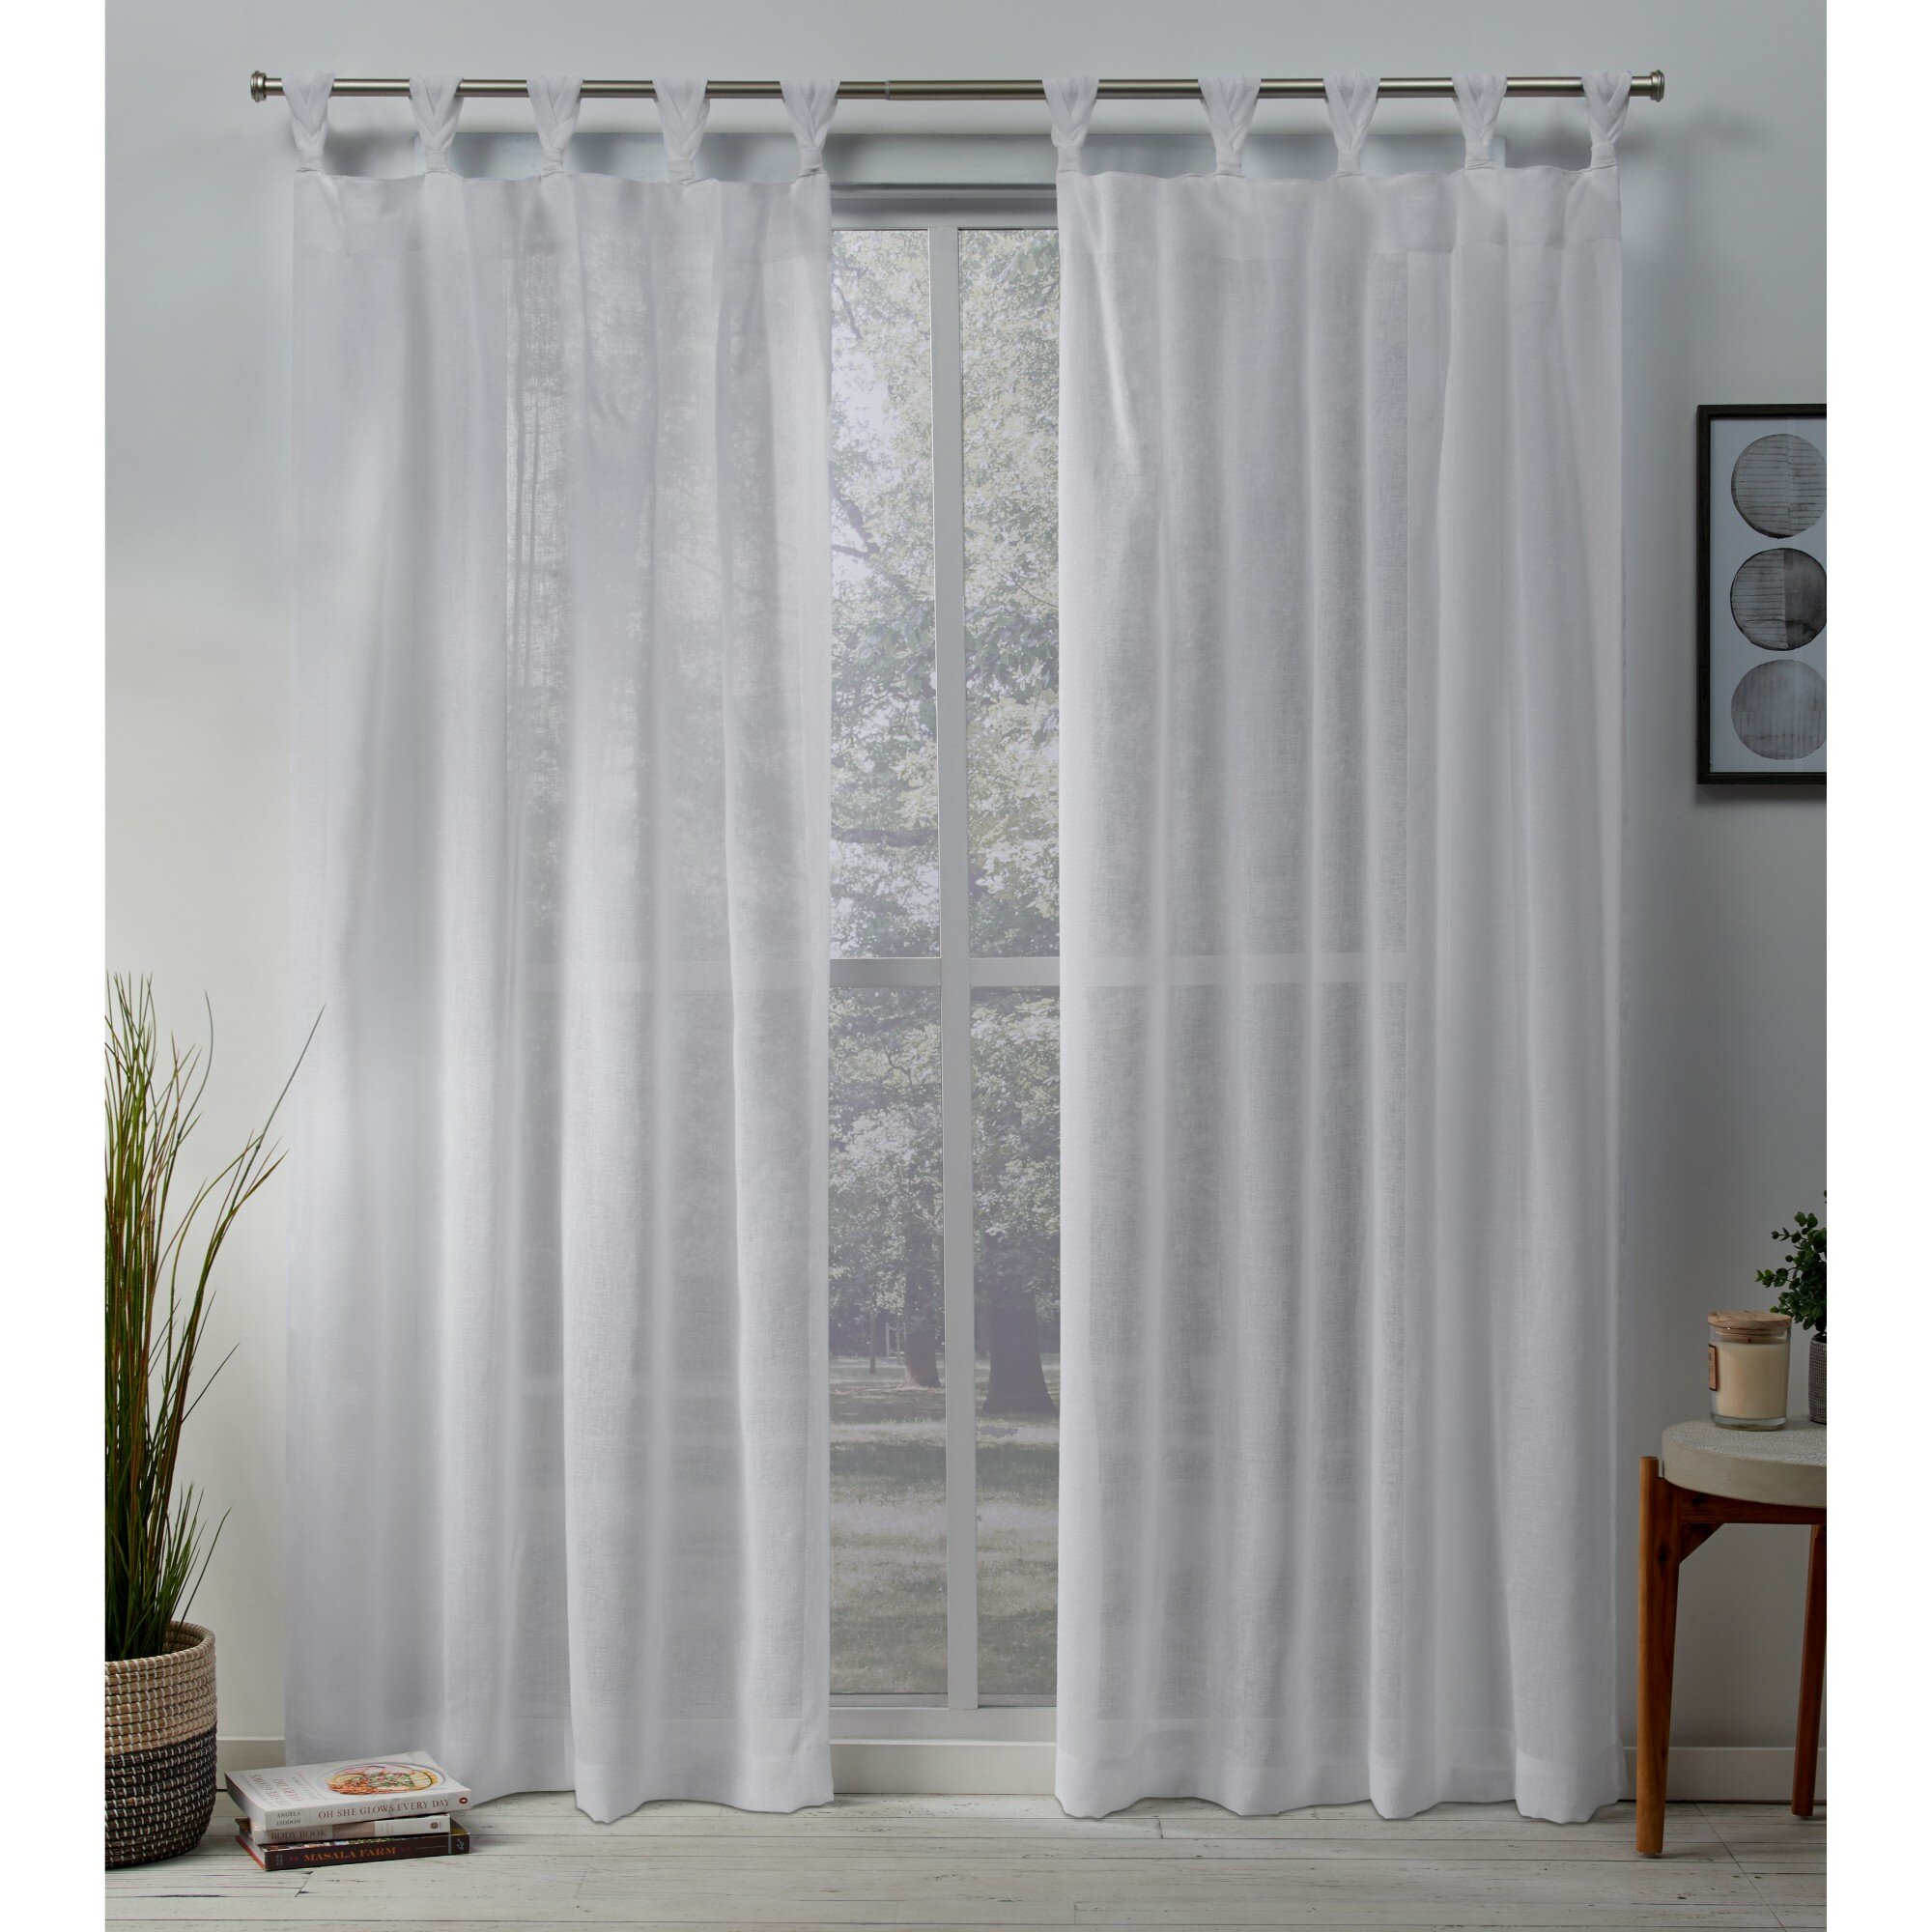 tab top curtains with wooden buttons